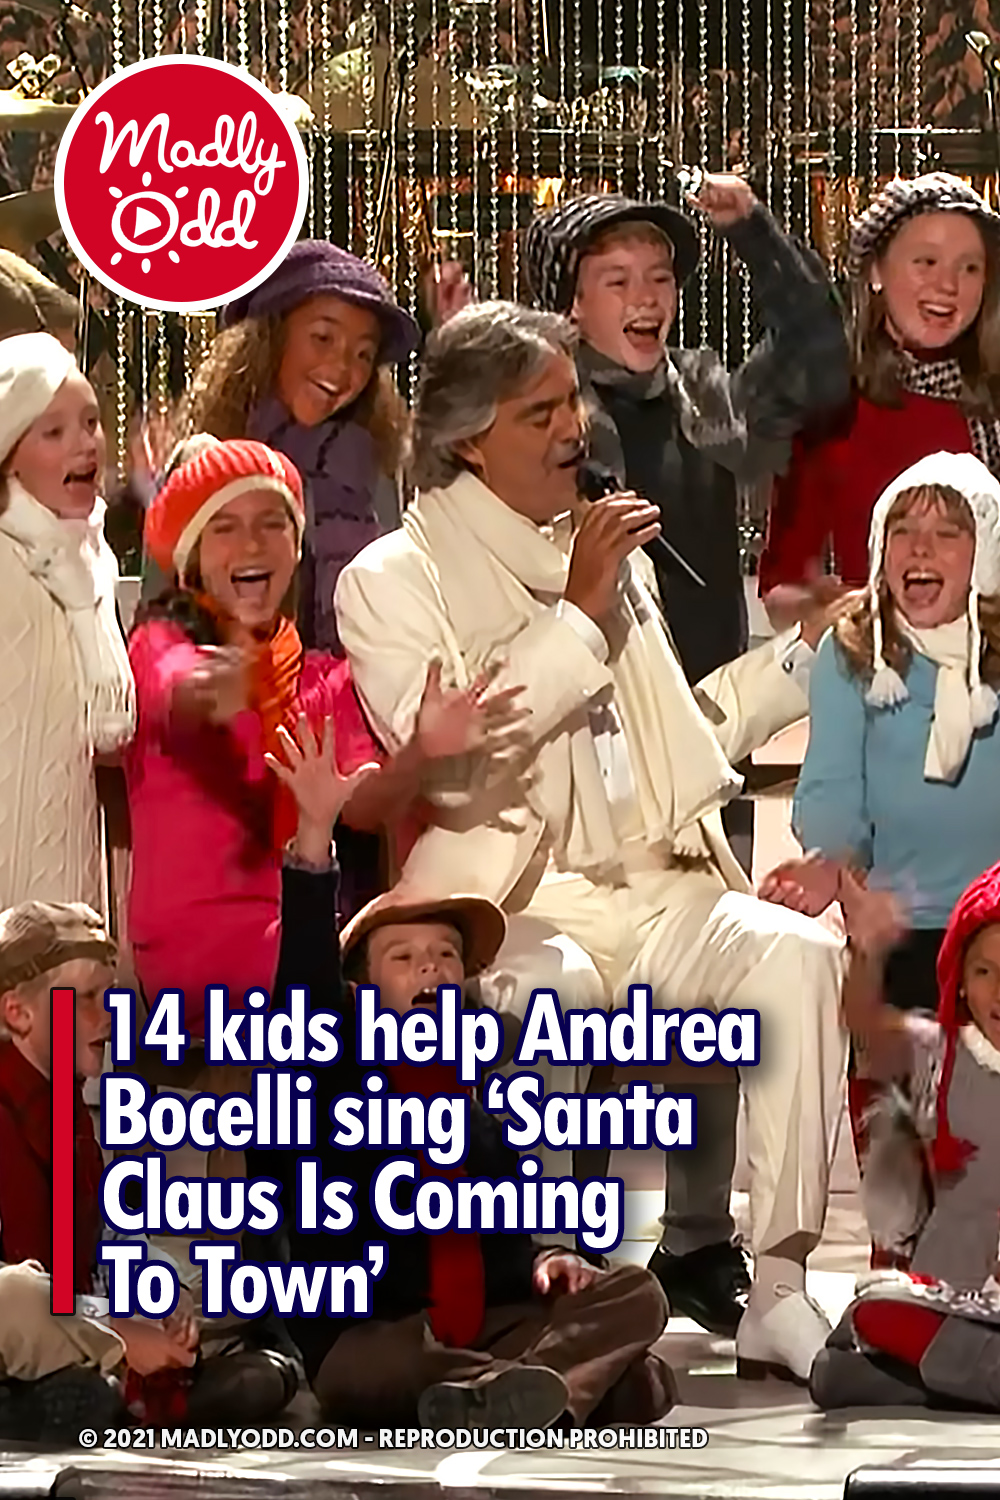 14 kids help Andrea Bocelli sing ‘Santa Claus Is Coming To Town’